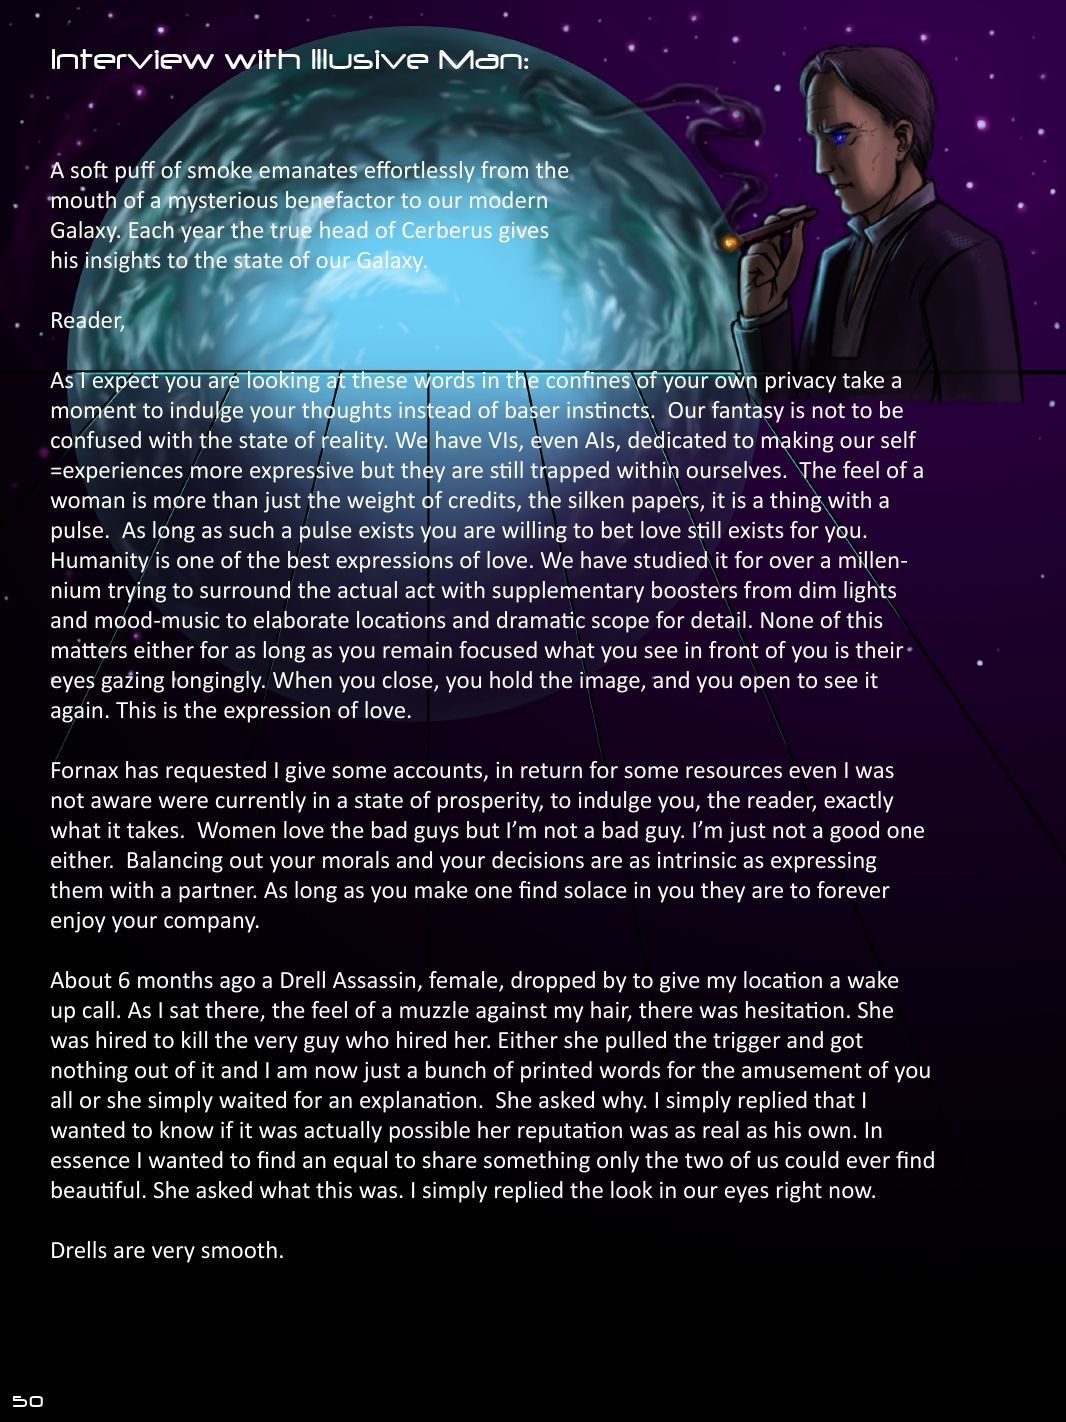 FORNAX The galaxys finest xenophilia (Mass Effect) page 50